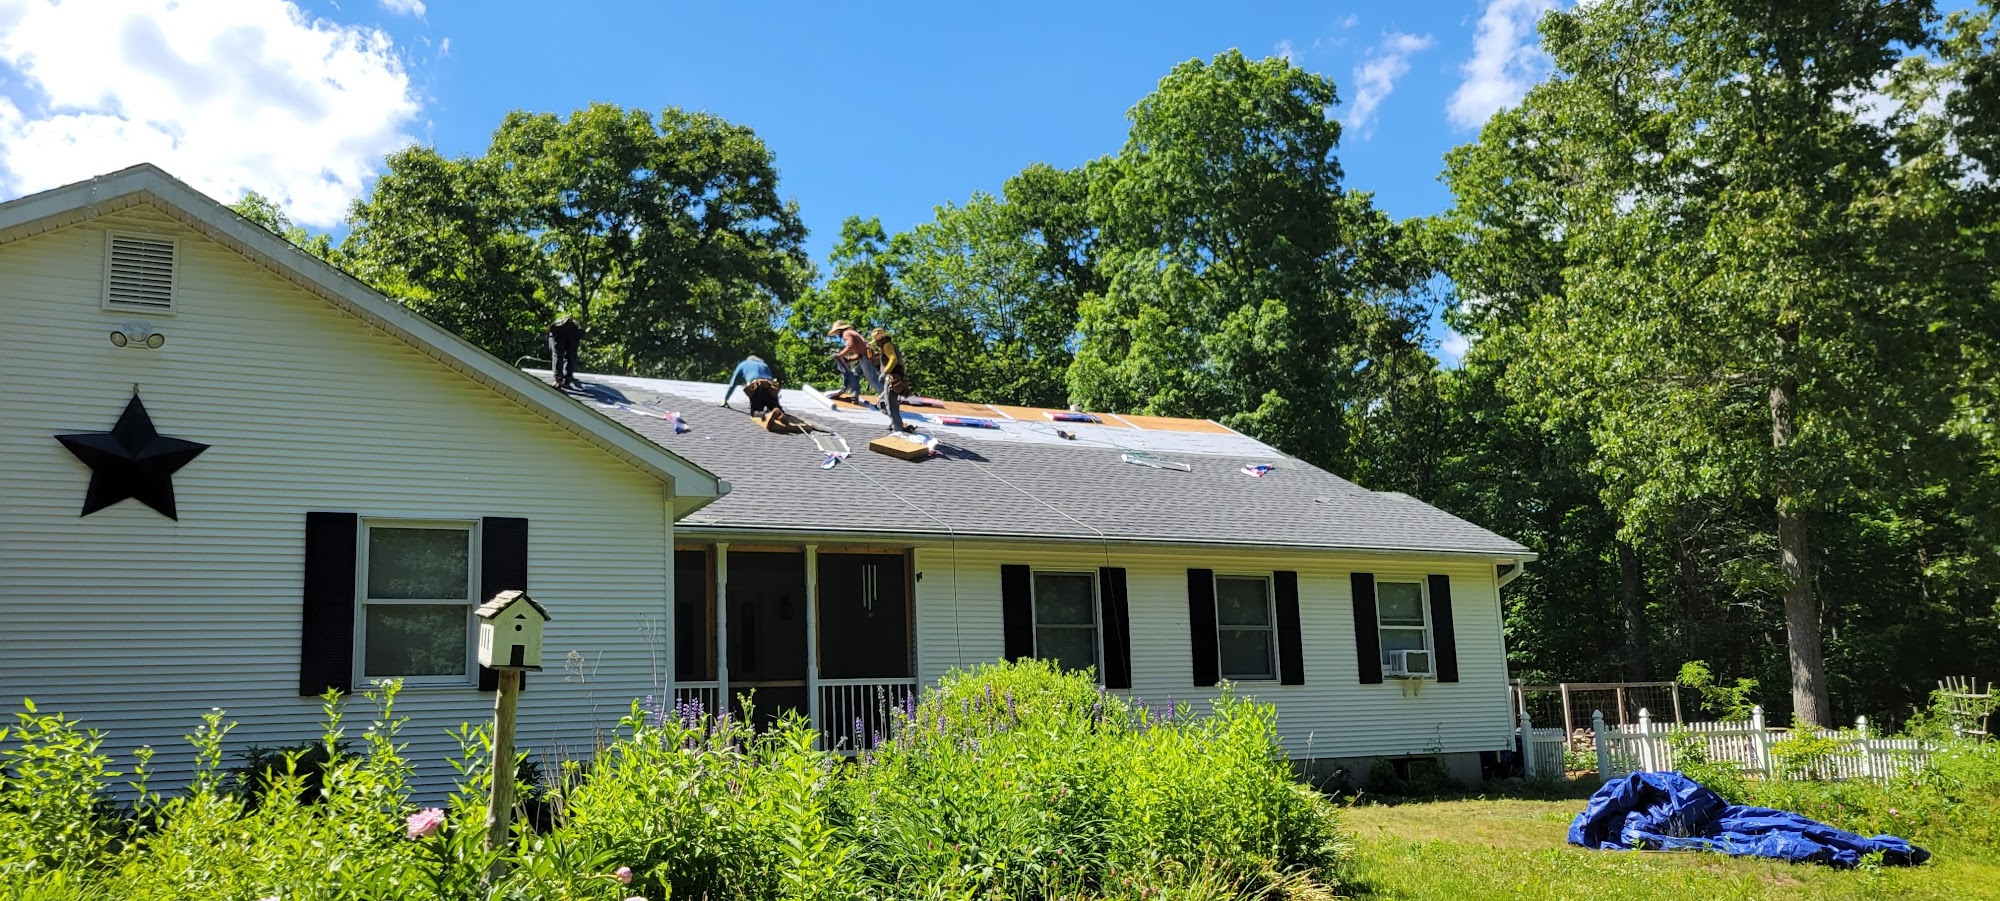 Swift Waters Gutters & Roofing LLC 415 Boston Post Rd Unit 4 Unit 4, North Windham Connecticut 06256